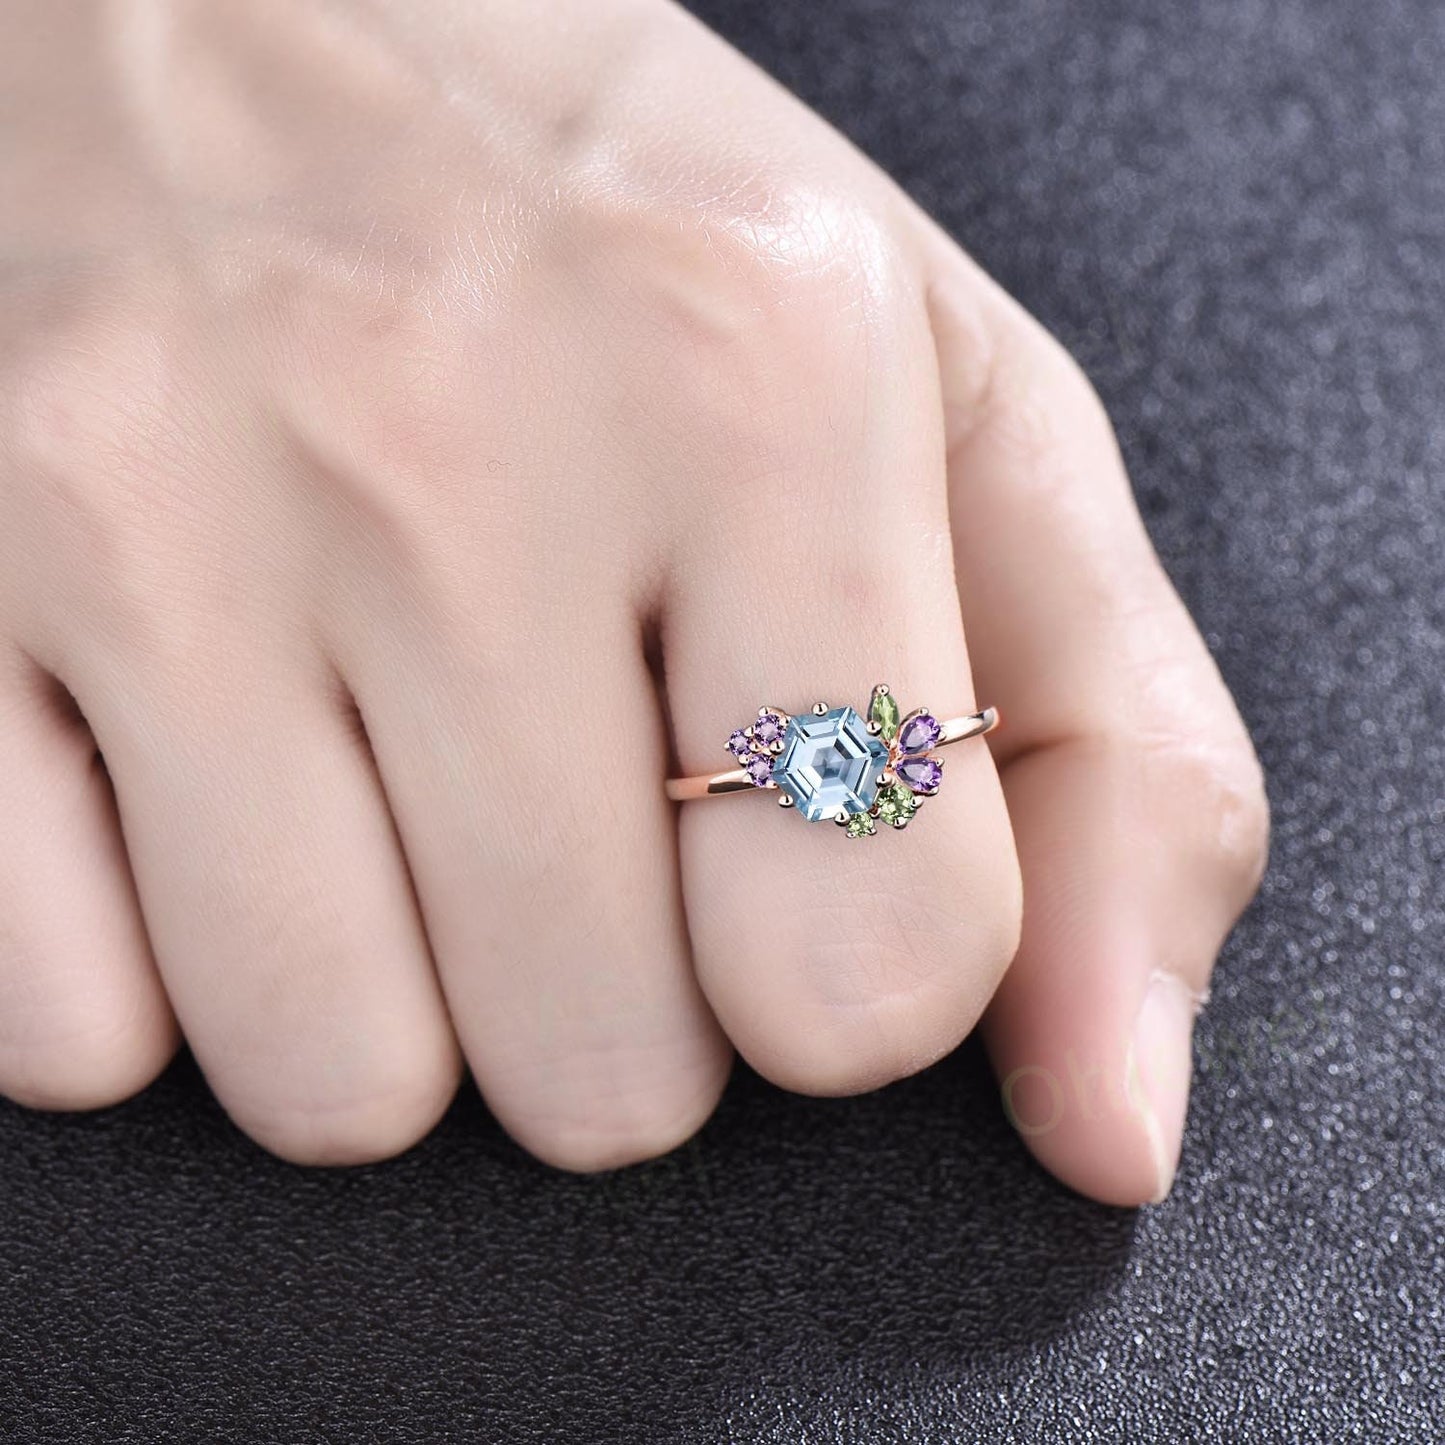 Unique hexagon cut aquamarine ring cluster engagement ring 14k rose gold women gift peridot amethyst ring March birthstone ring fine jewelry